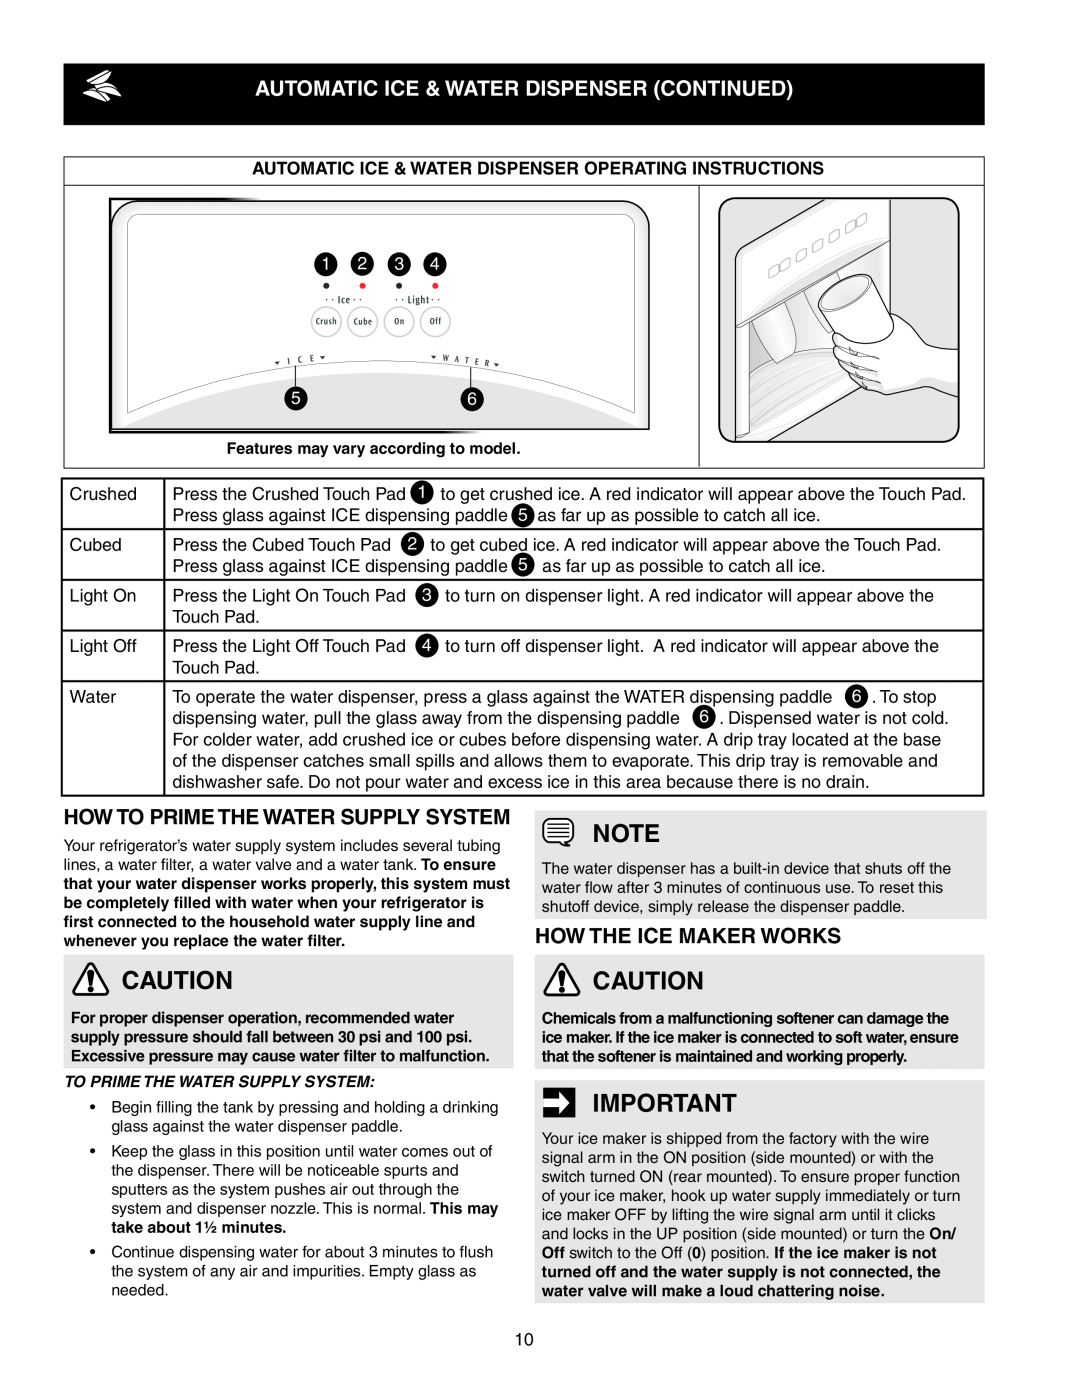 Frigidaire 241856001 important safety instructions Automatic Ice & Water Dispenser Continued, How The Ice Maker Works 